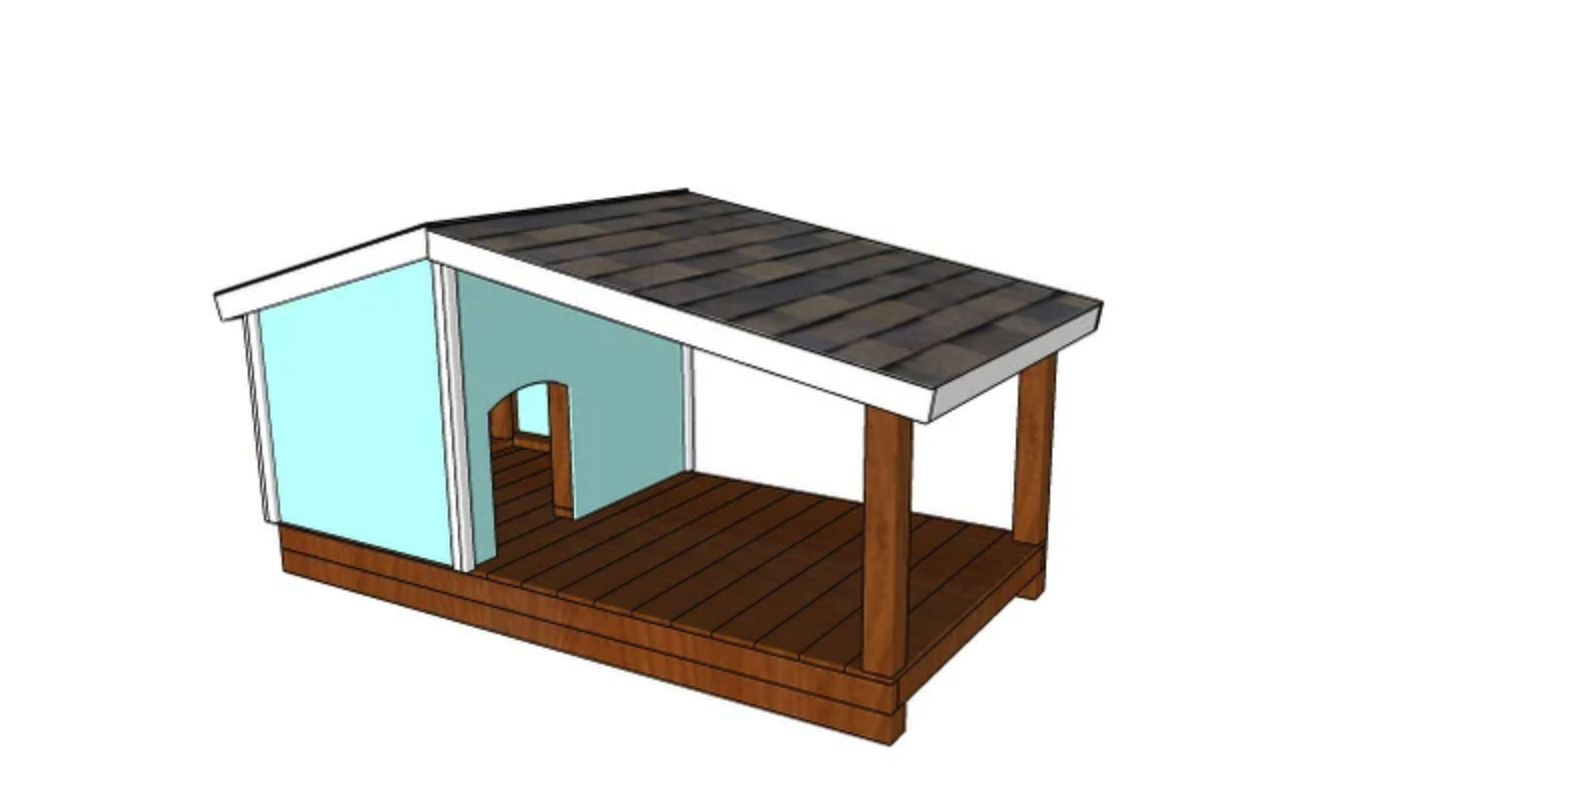 product sketch of dog house made of wood with teel paneling and an extended covered porch